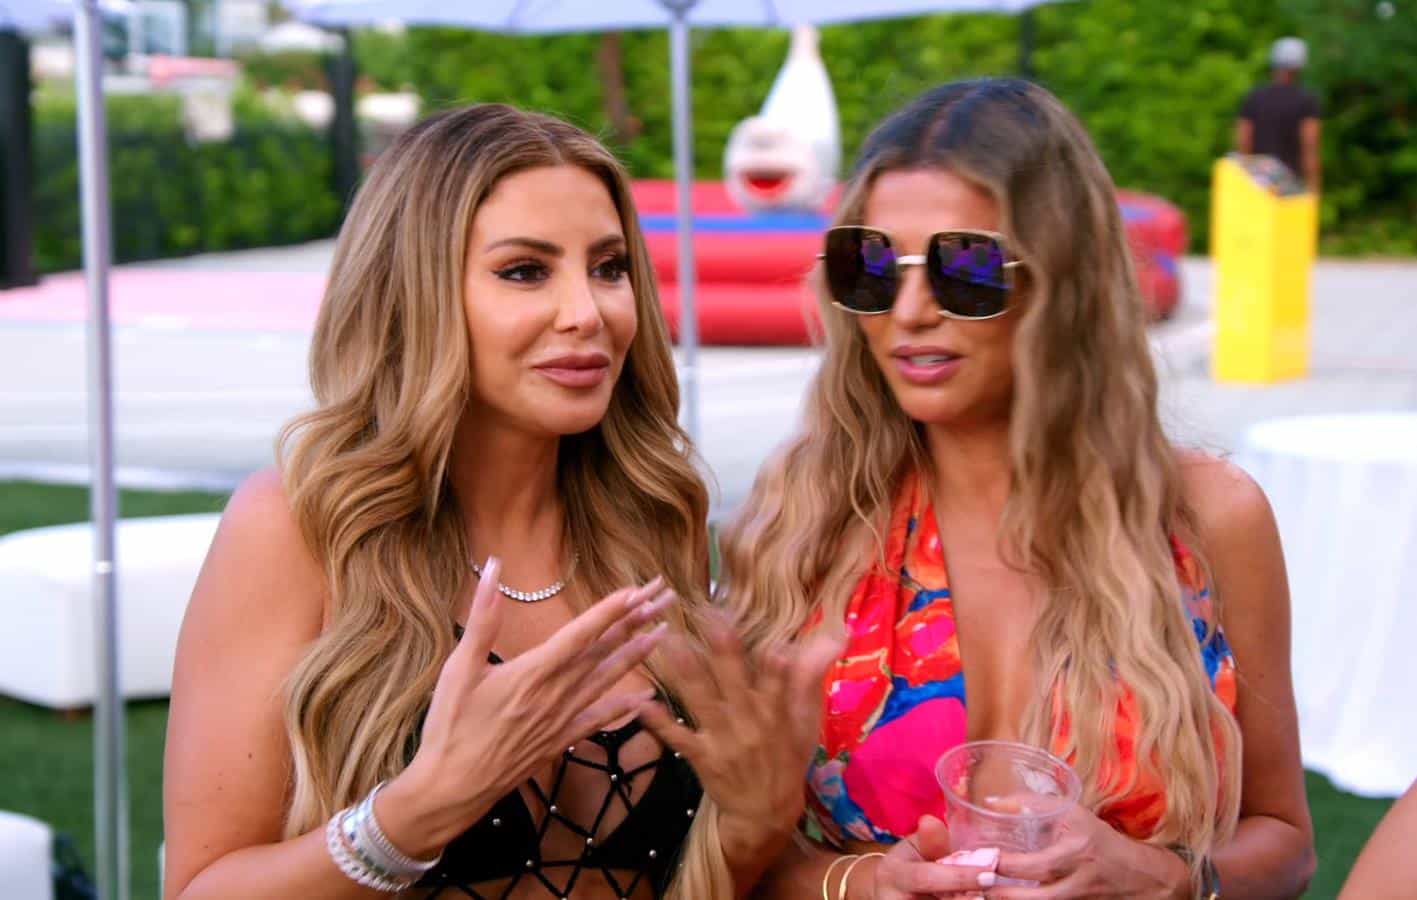 RHOM Recap: Alexia Questions Larsa's OnlyFans Business as Larsa Throws a Hot Girl Summer Party, Plus We Meet New Housewives Guerdy, Julia and Nicole